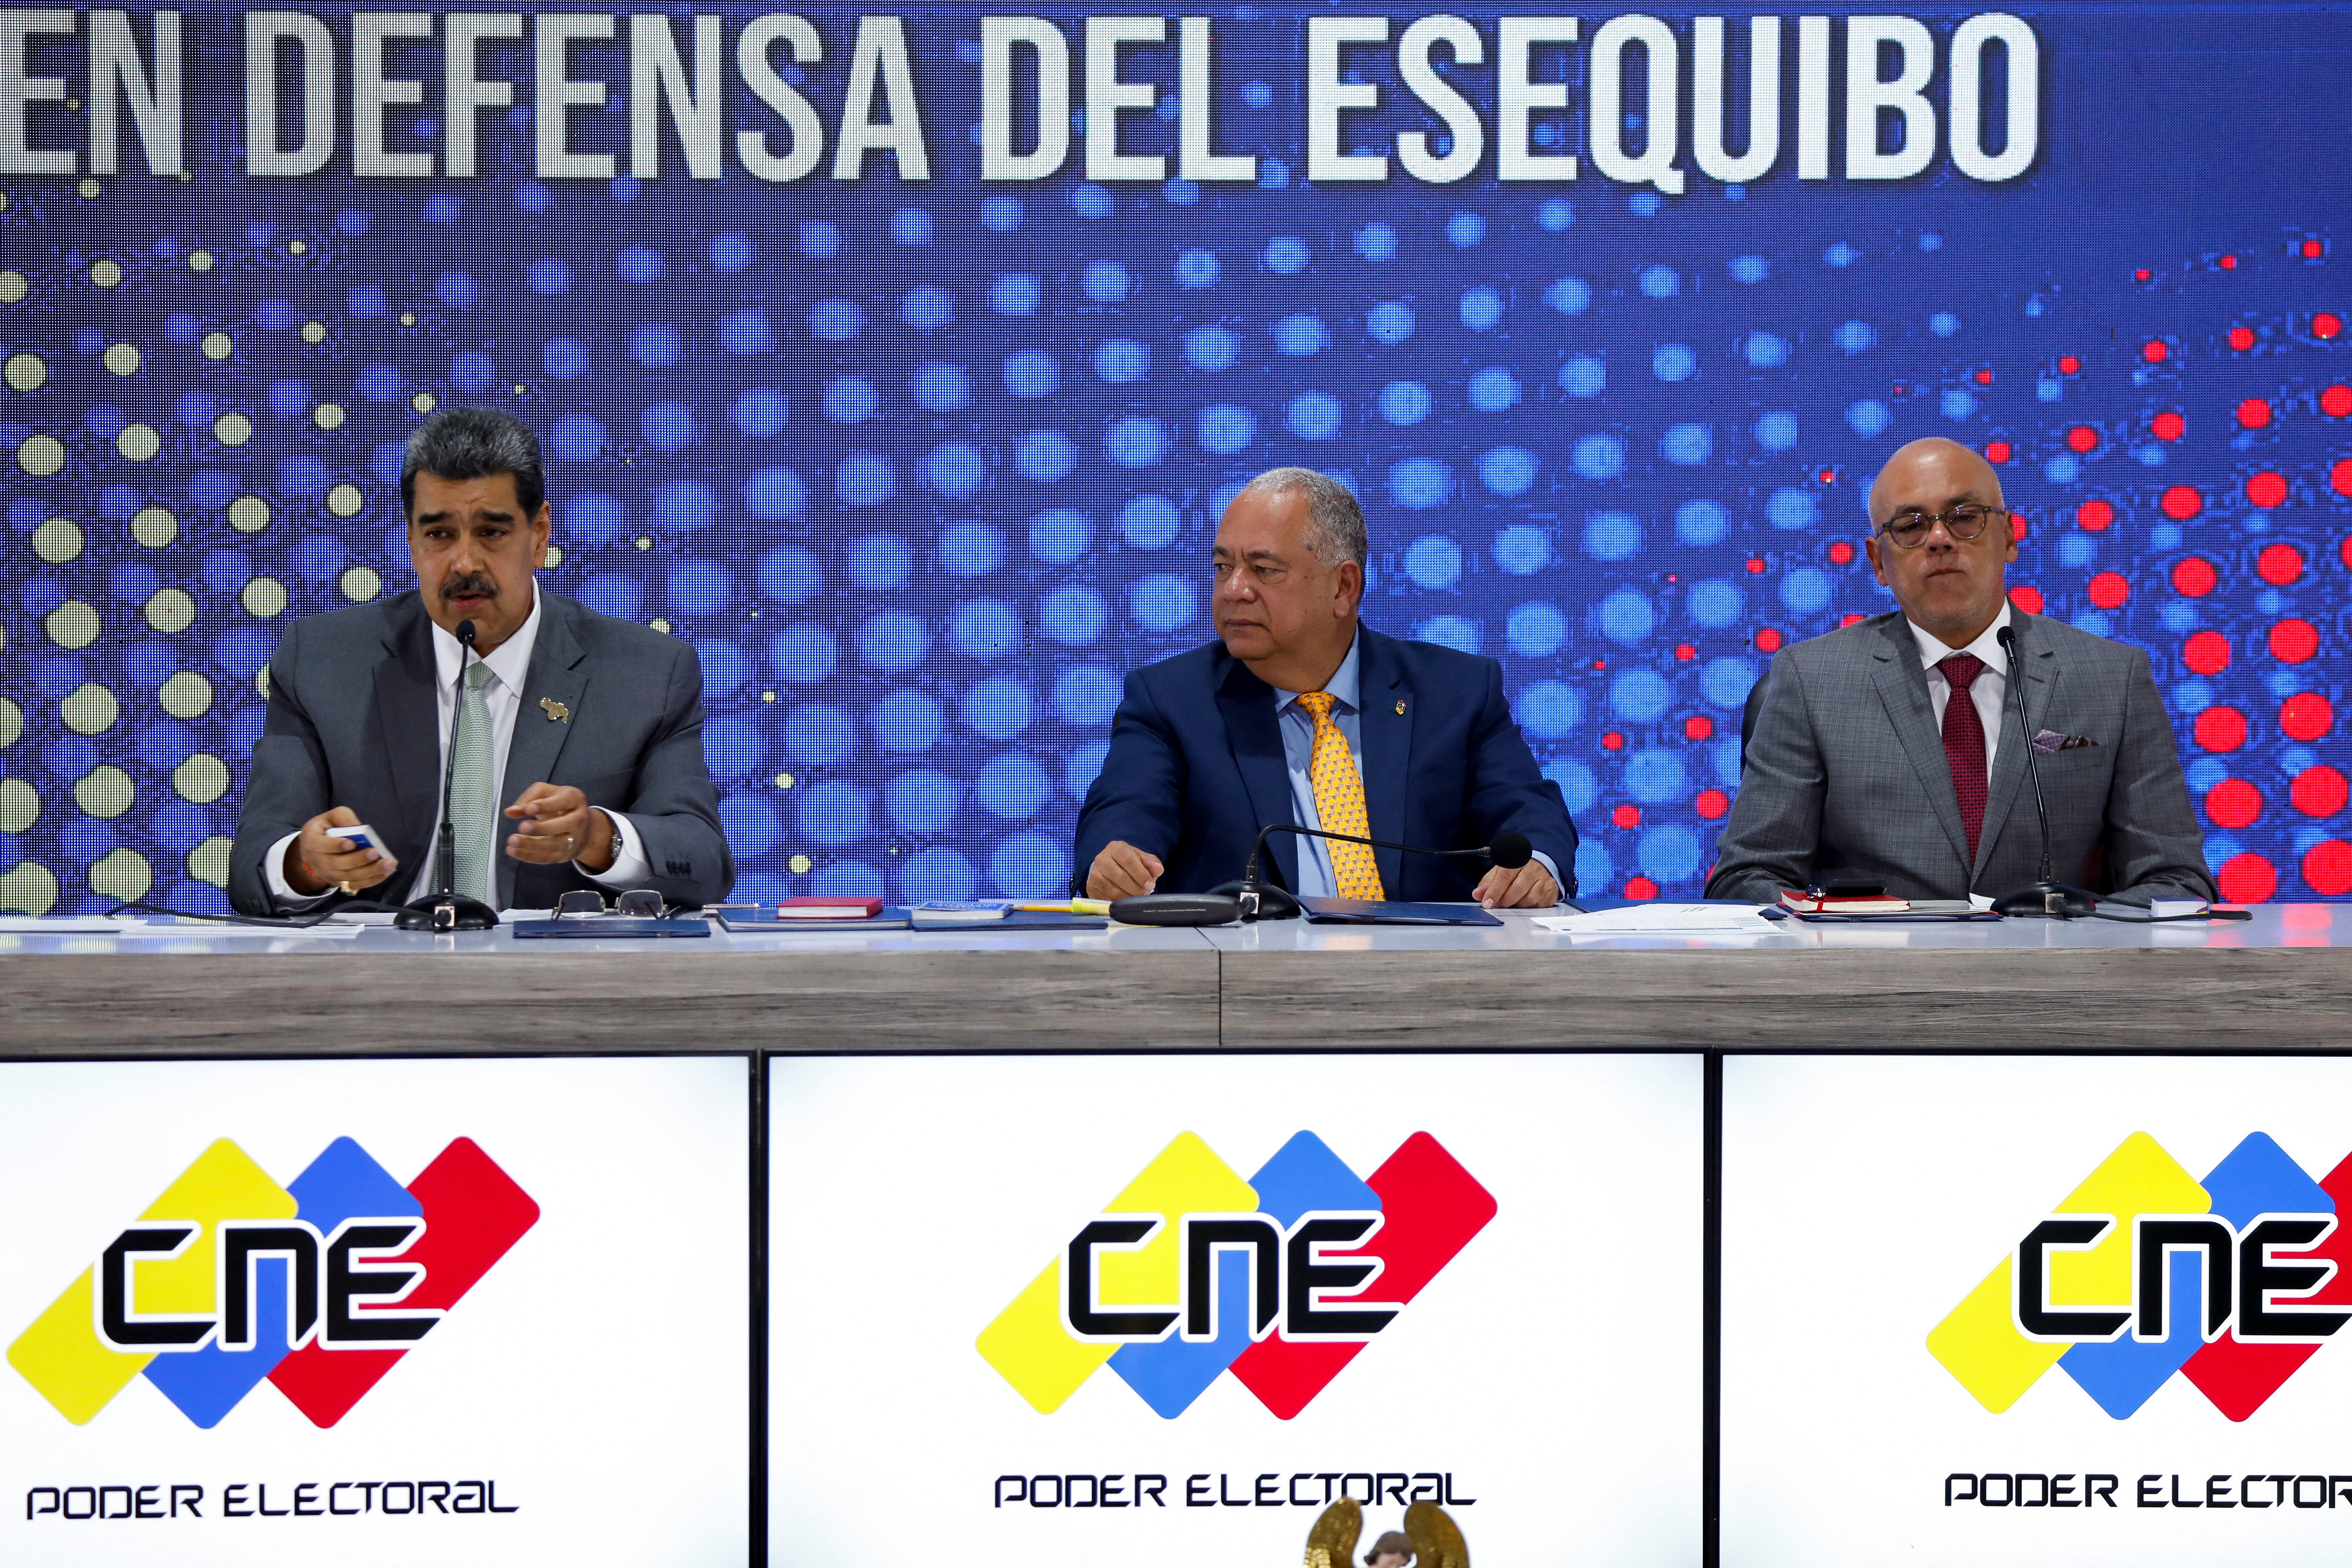 Venezuelan President Nicolas Maduro attends an event at the National Electoral Council, in Caracas